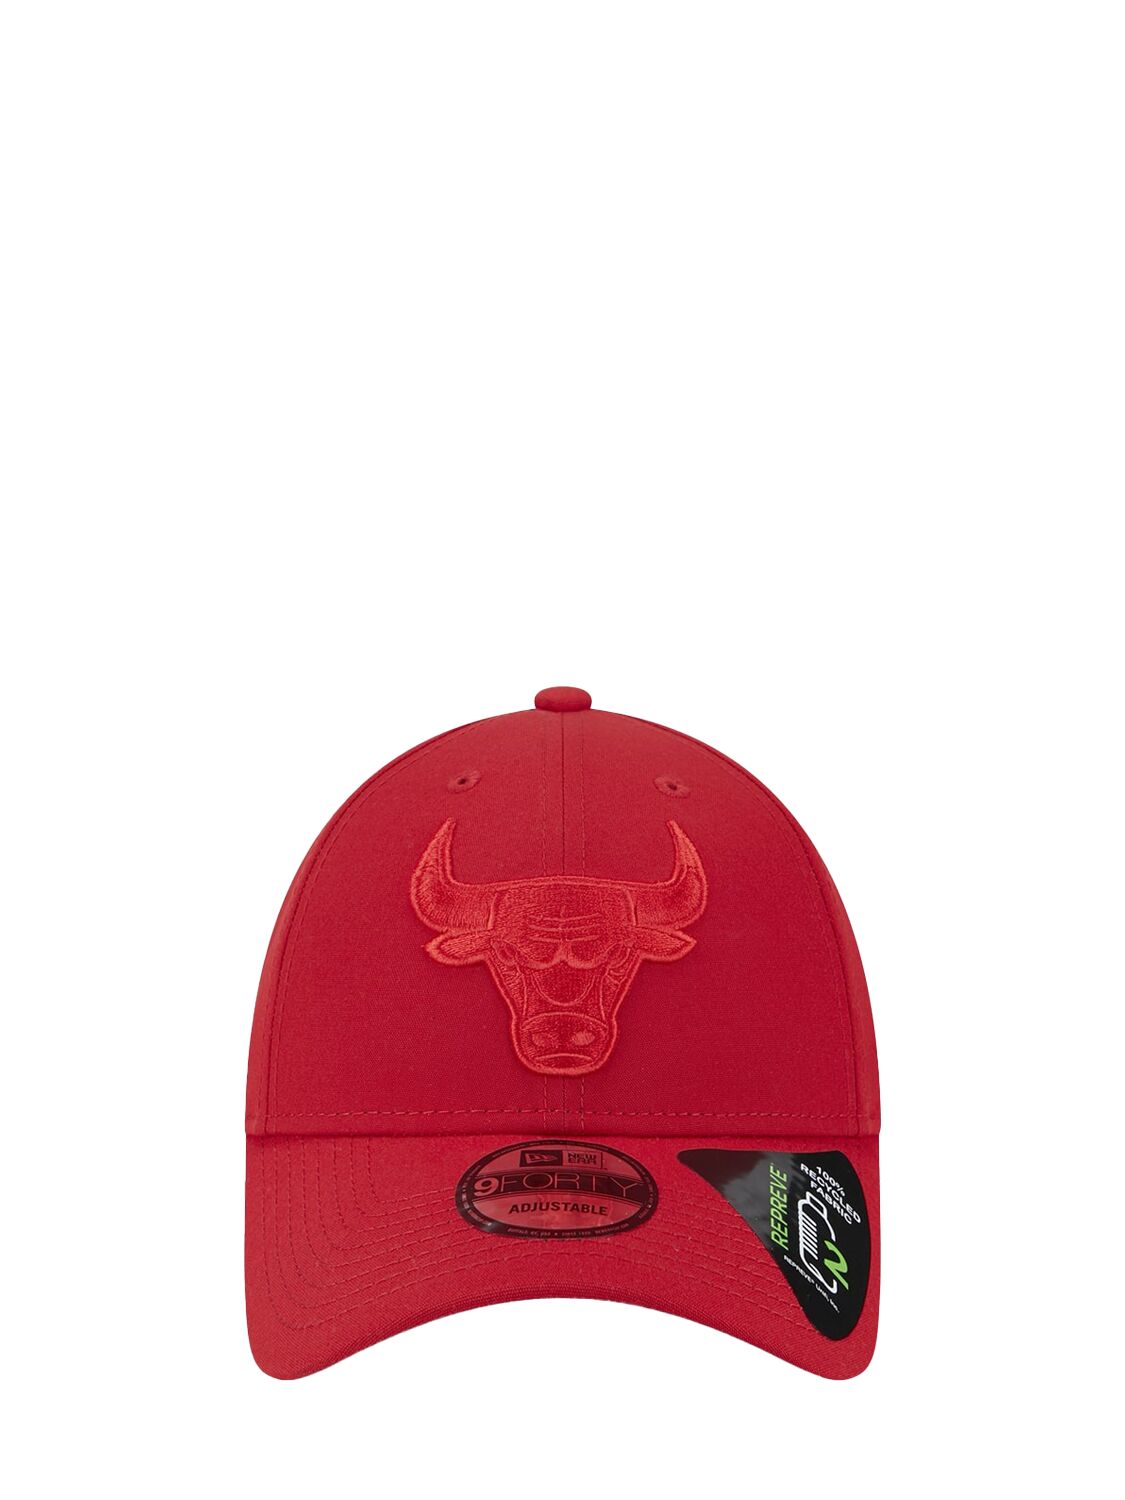 New Era 9forty Reprieve Chicago Bulls Hat In Red